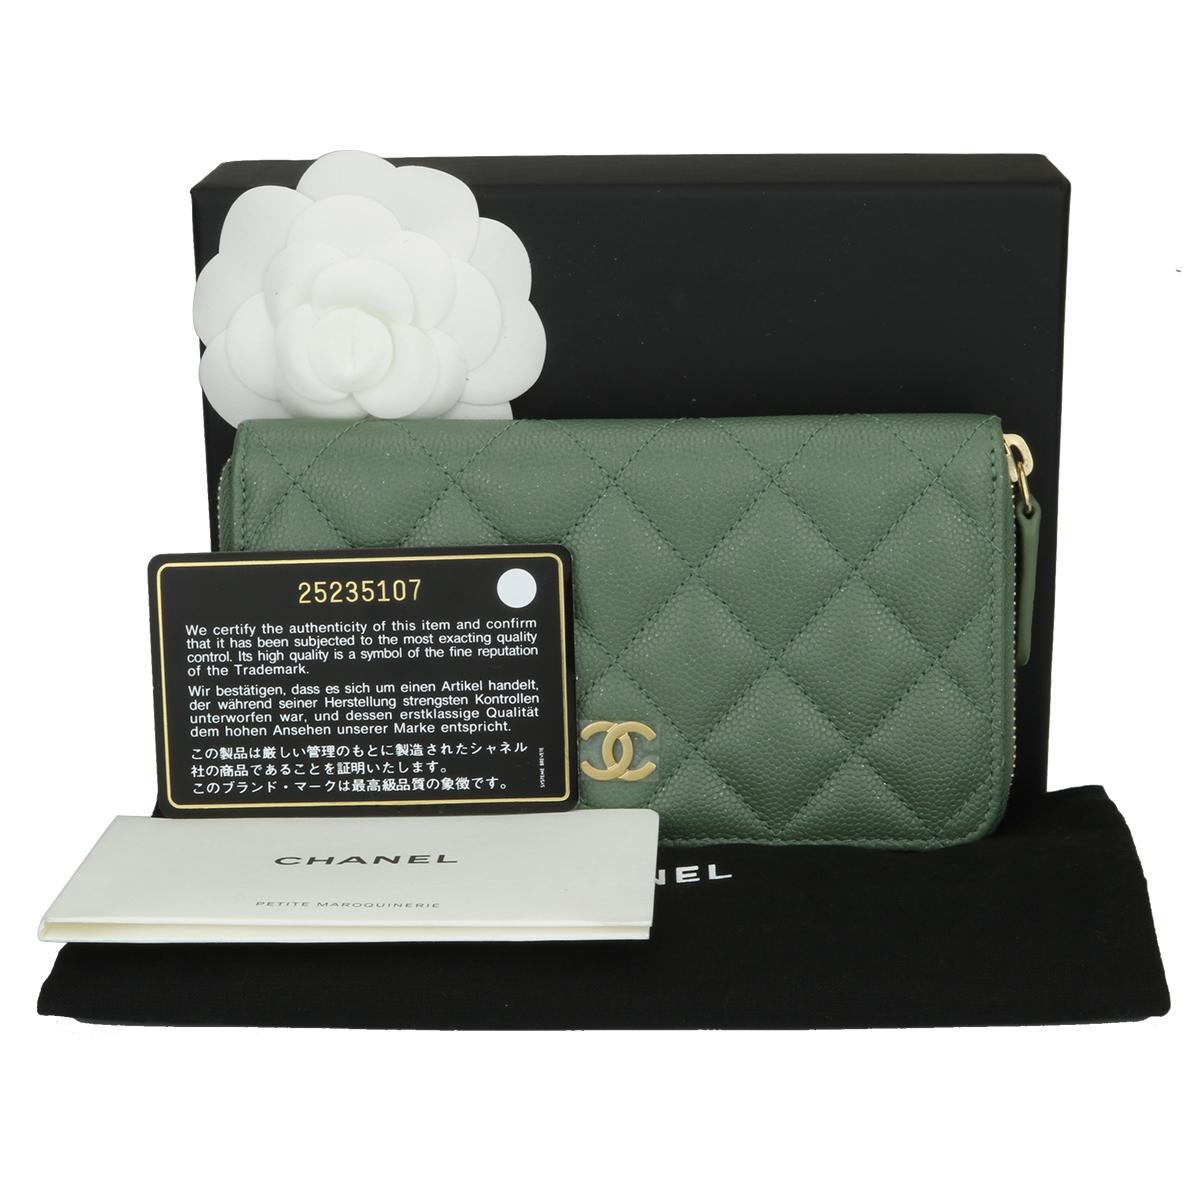 Authentic CHANEL Classic Zipped Wallet Medium Green Caviar Iridescent with Brushed Gold Hardware 2018.

This stunning zippy wallet is in brand new condition, the wallet still holds its original shape, and the hardware is still very shiny. Extremely